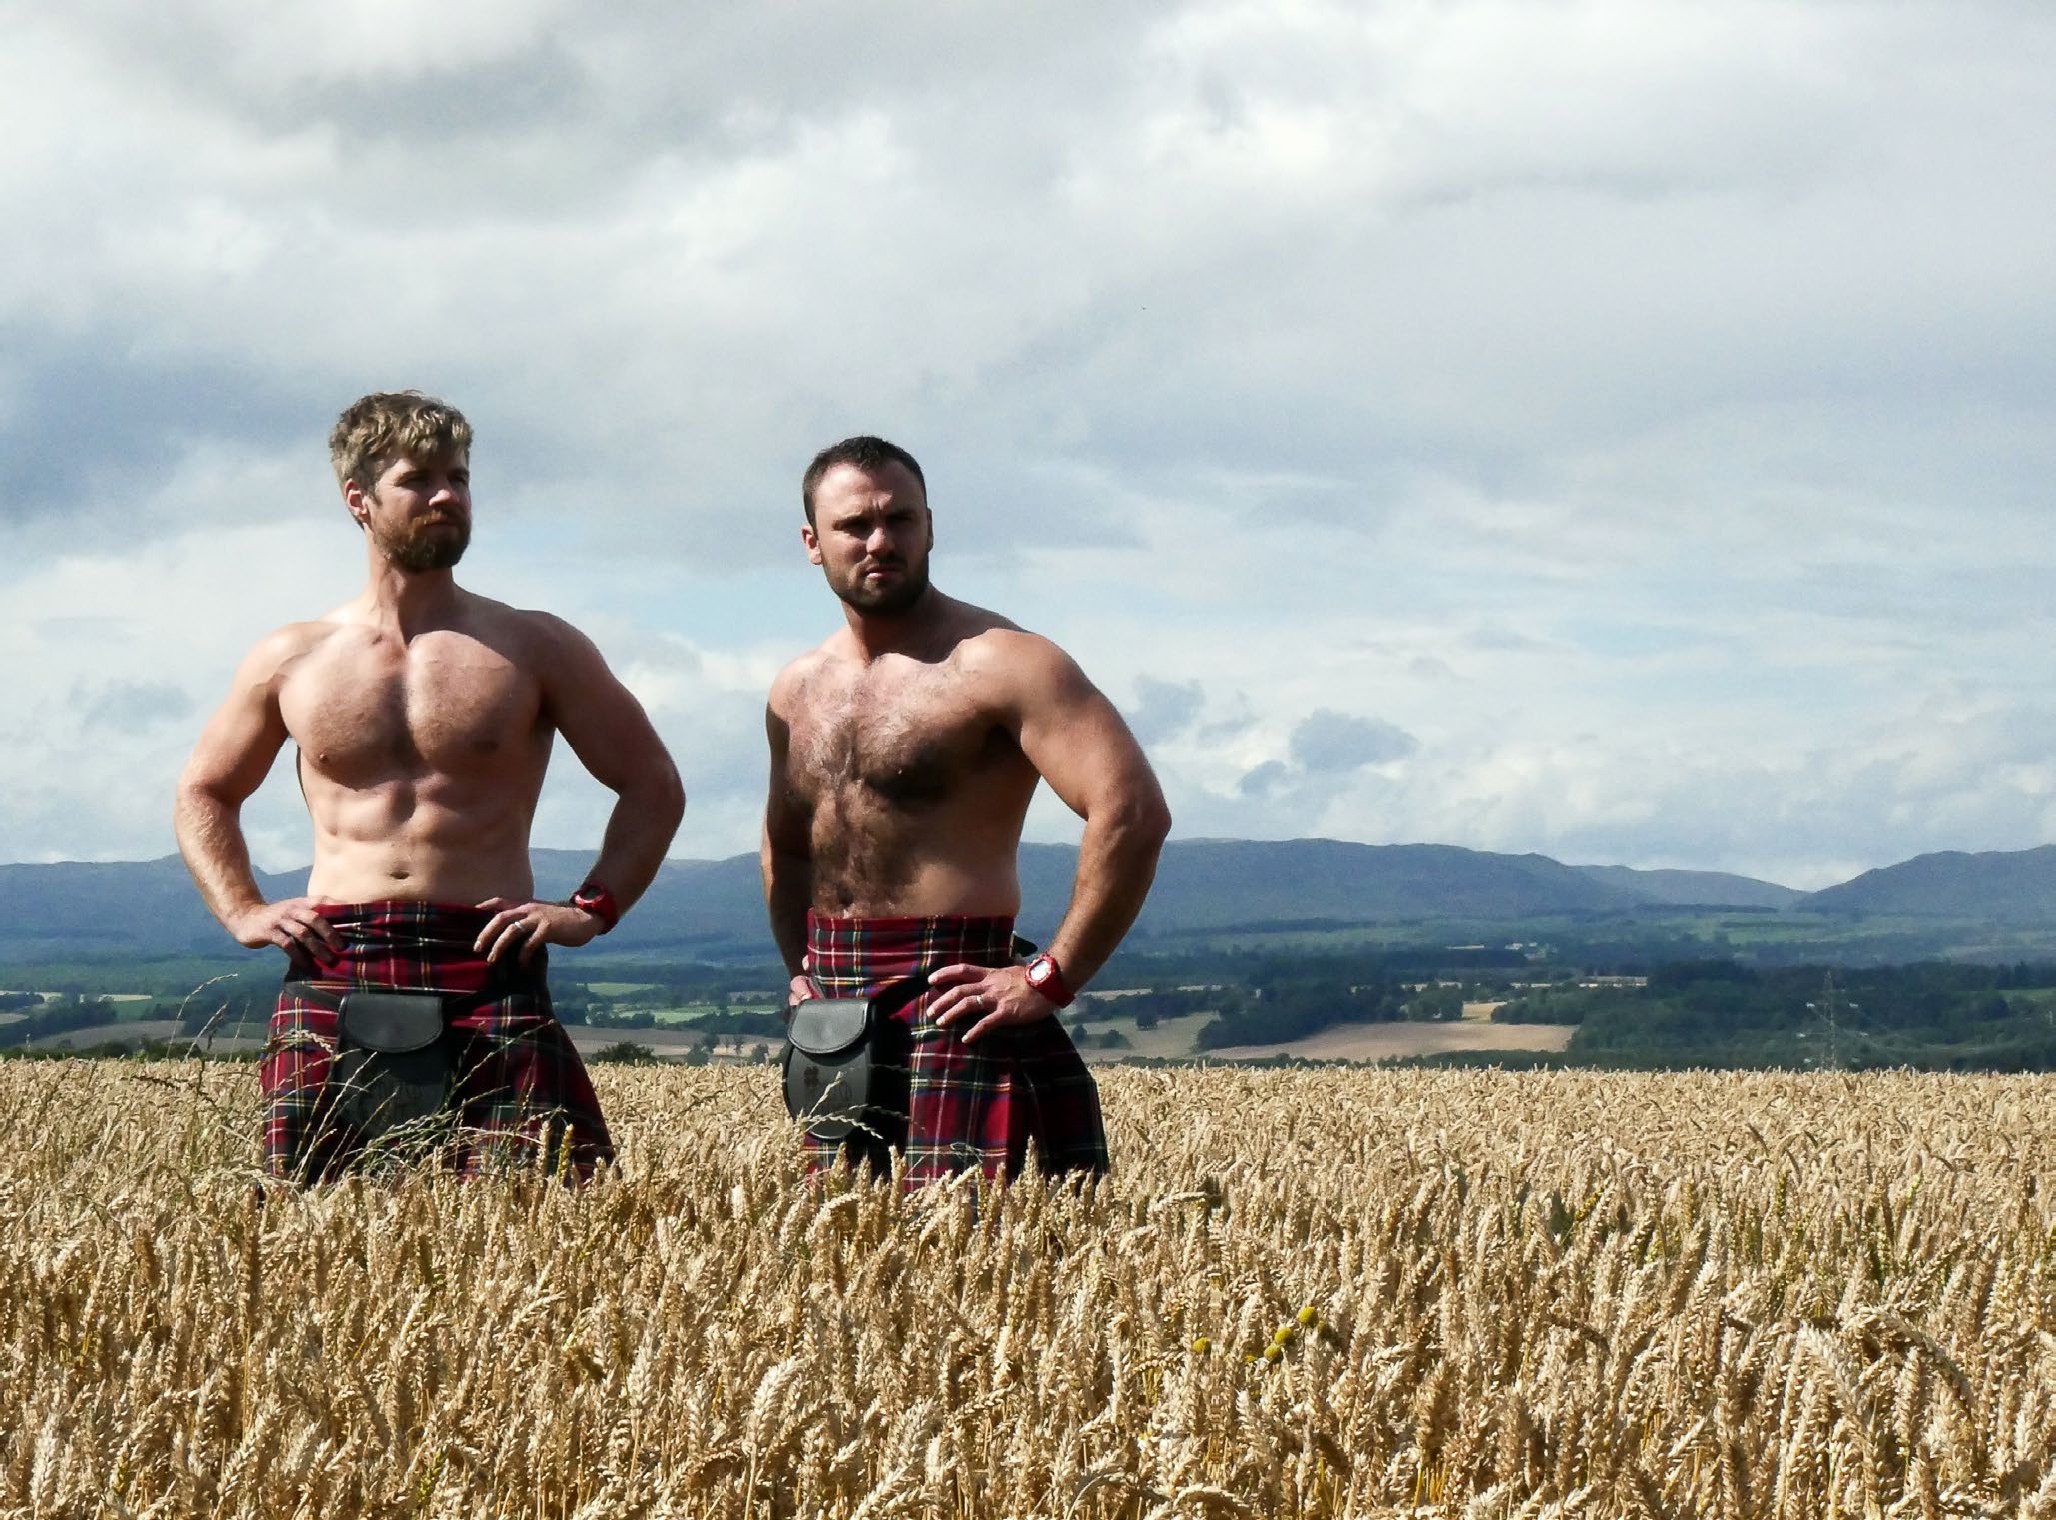 THE KILTED COACHES | DNA Magazine DNA #248 – Sexiest Men Alive 2020